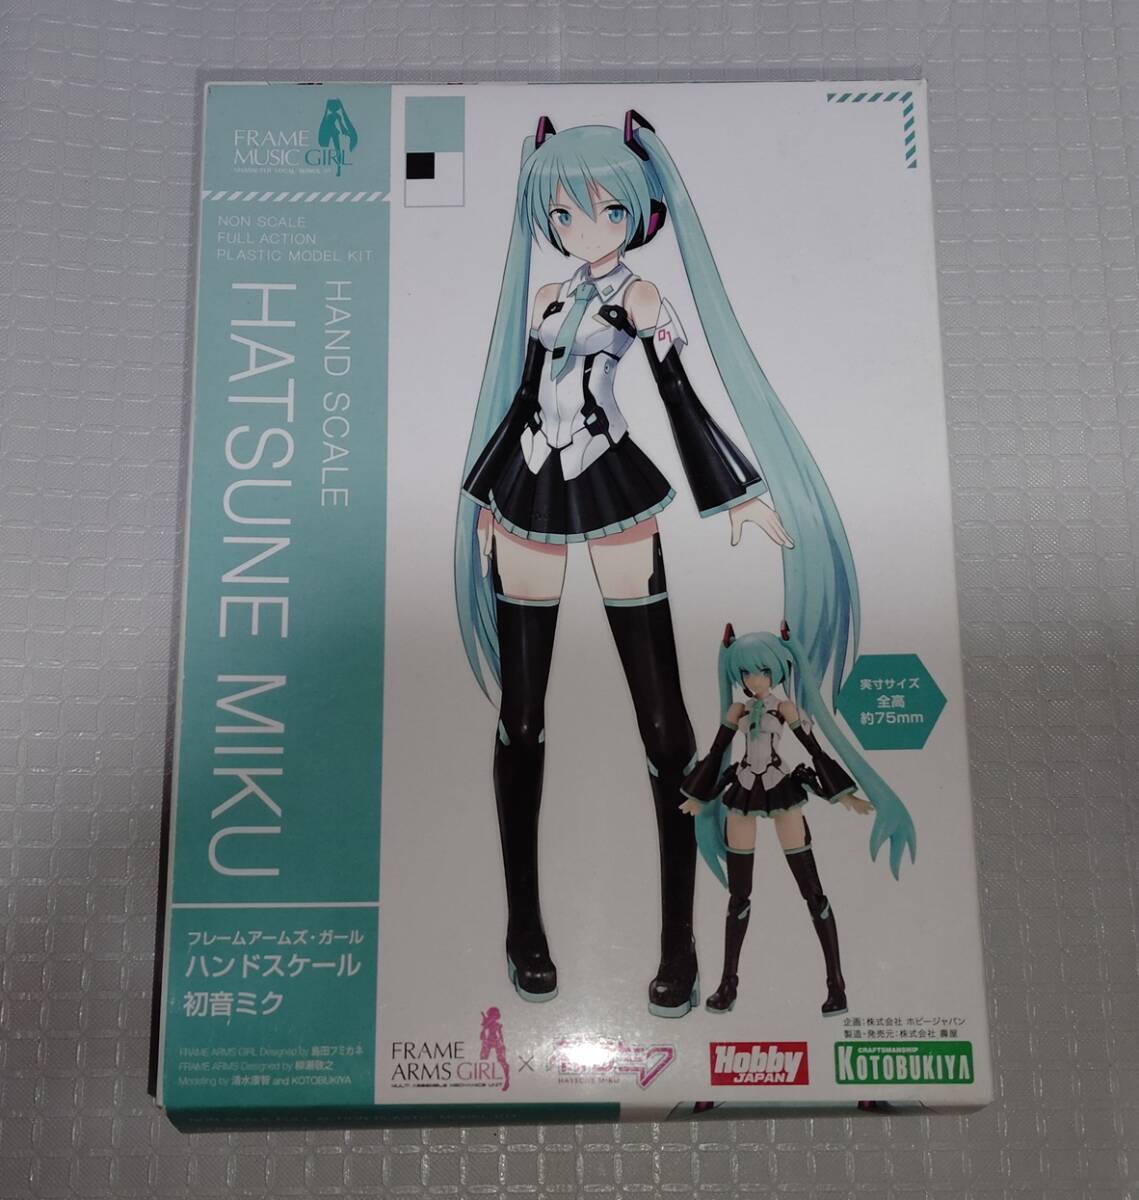 [ frame arm z* girl ] assembly on the way hand scale Hatsune Miku 